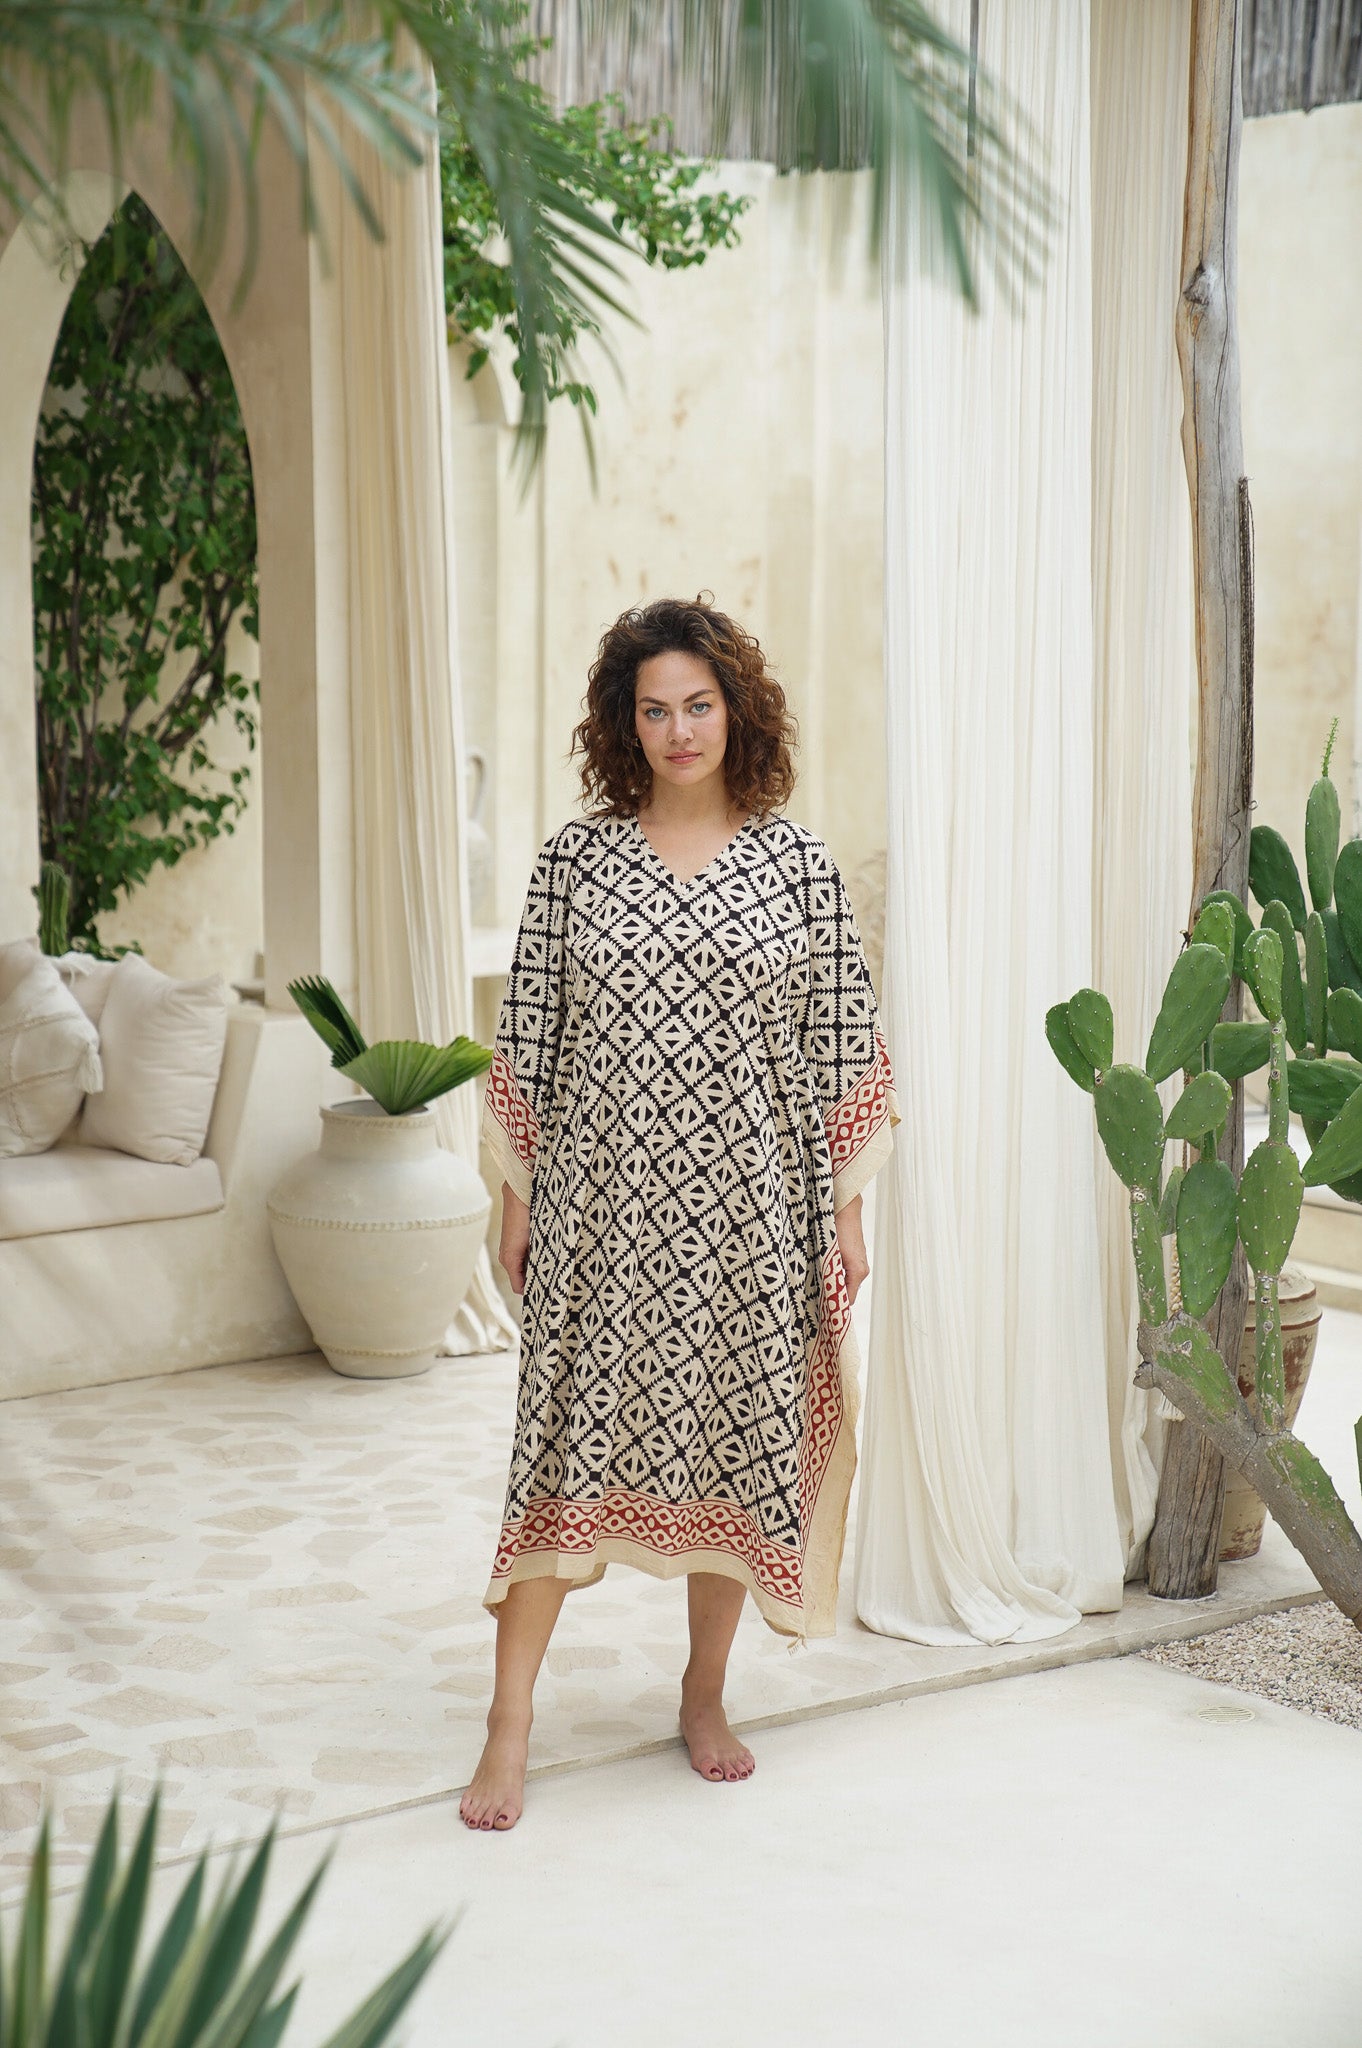 Unleash your inner goddess with our long kaftan in stunning lattice print. Ideal for any event, it offers unmatched comfort and style. Shop now!